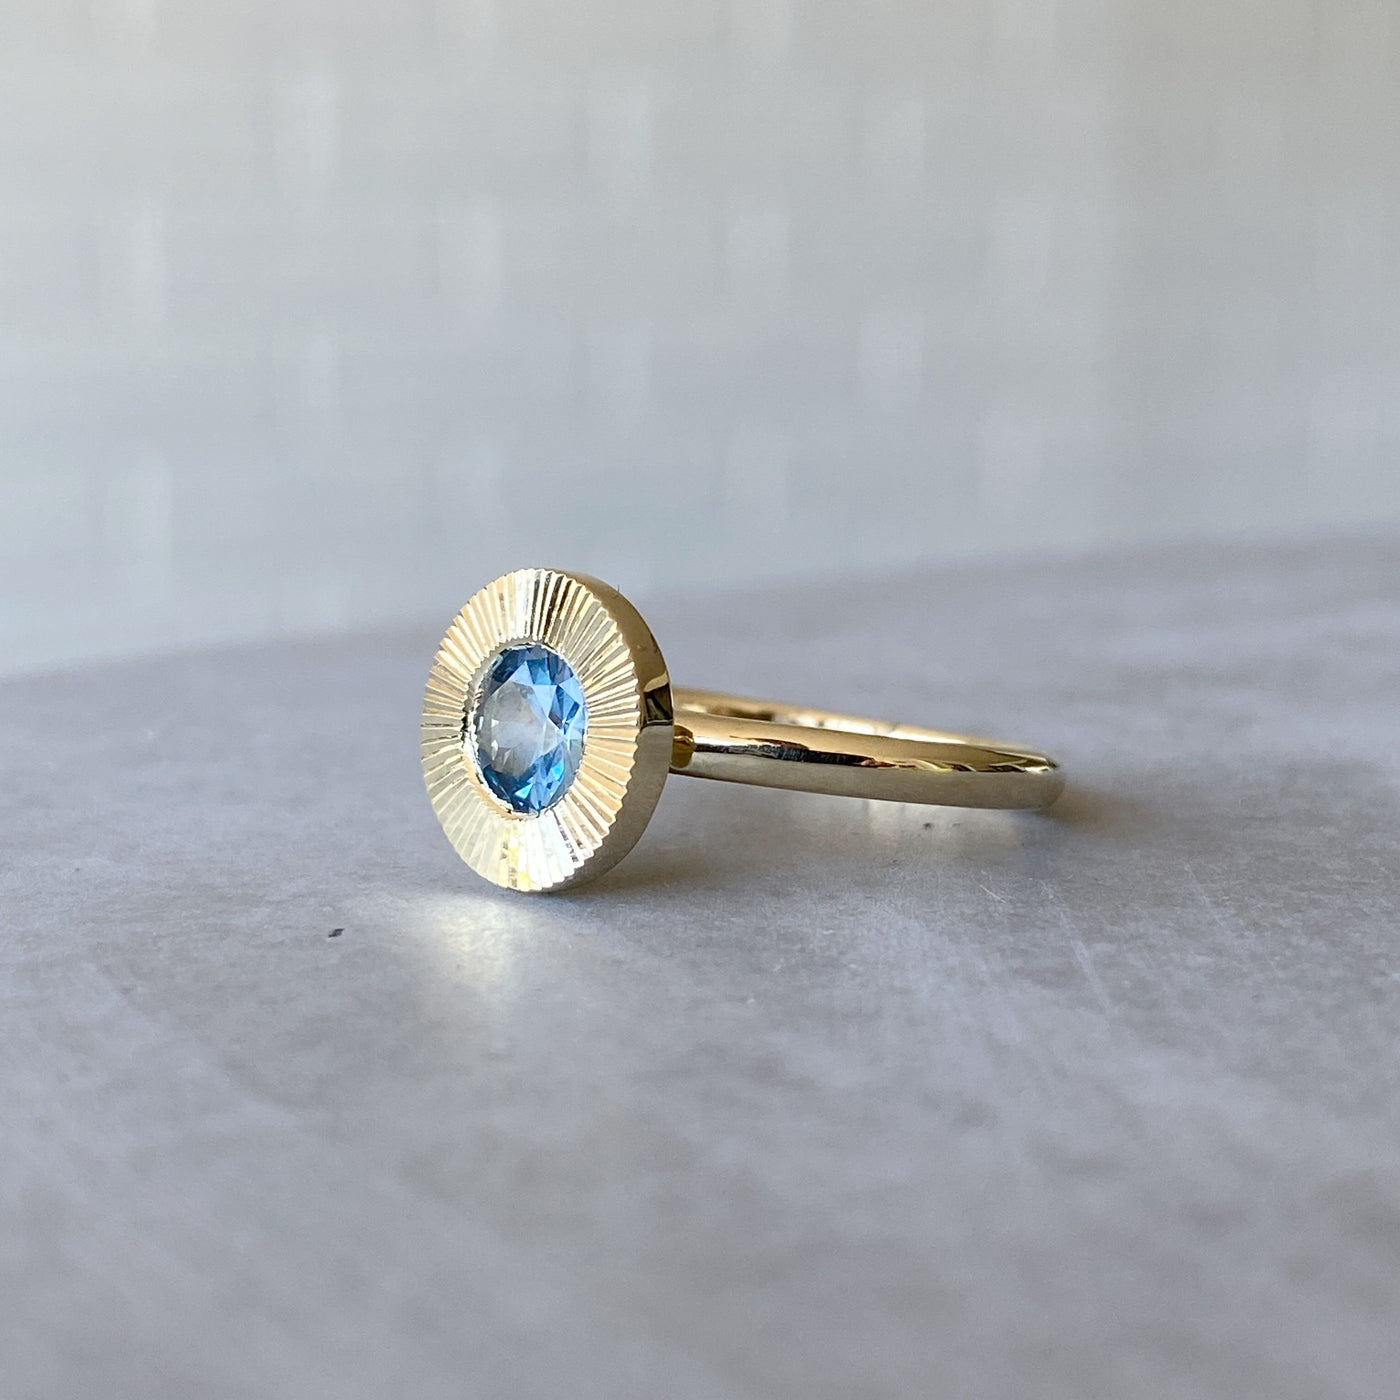 Side view of round Medium Blue Montana sapphire in a 14k yellow gold Aurora ring with an engraved halo border in natural light.